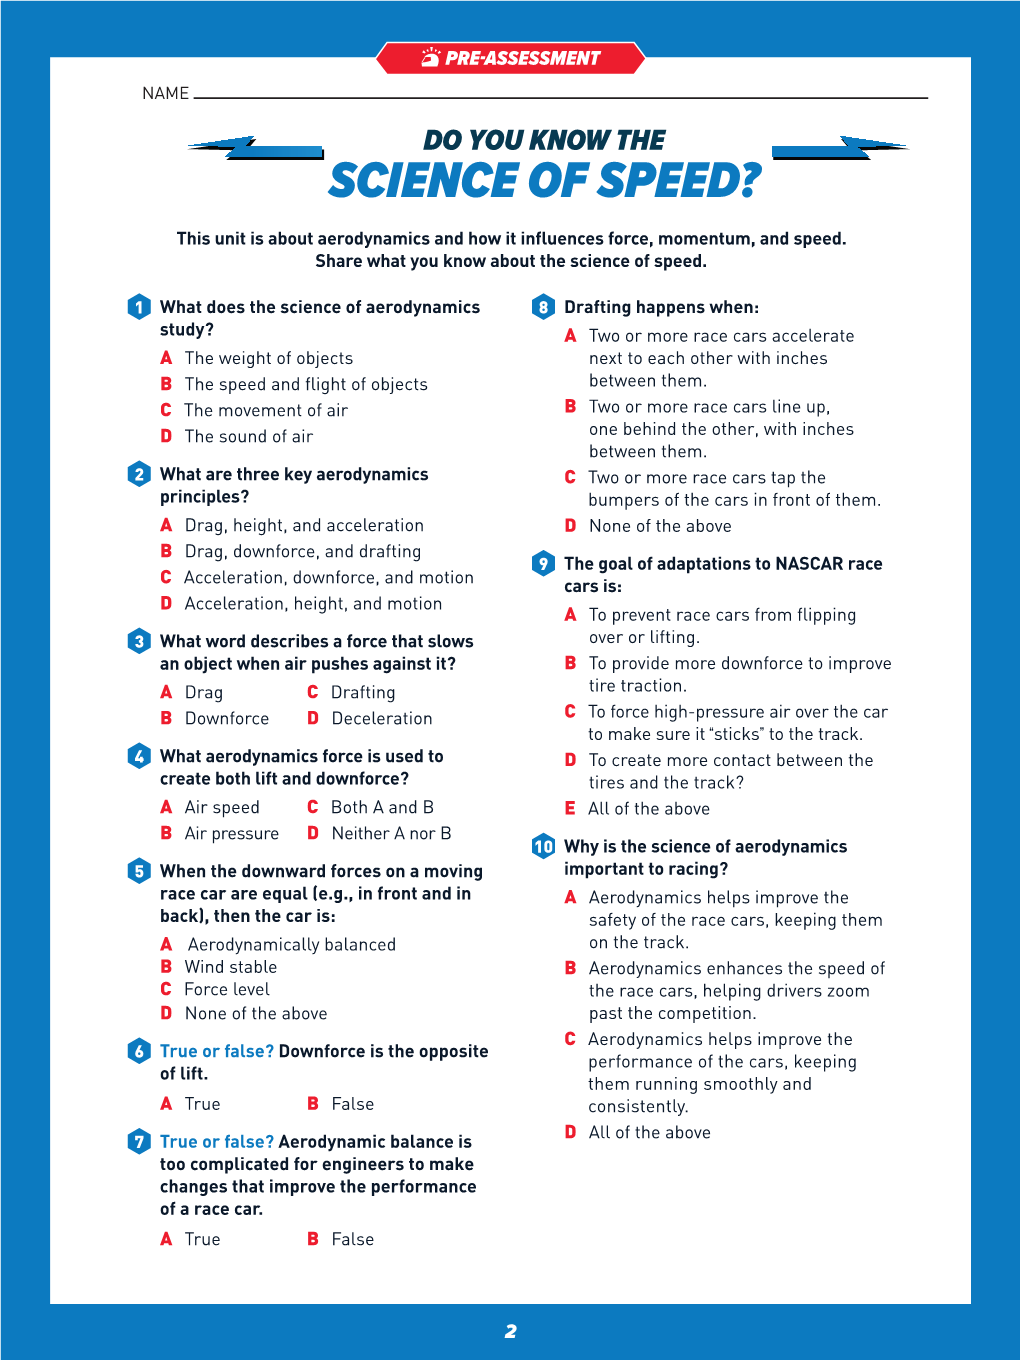 Pre-Assessment: Do You Know the Science of Speed?